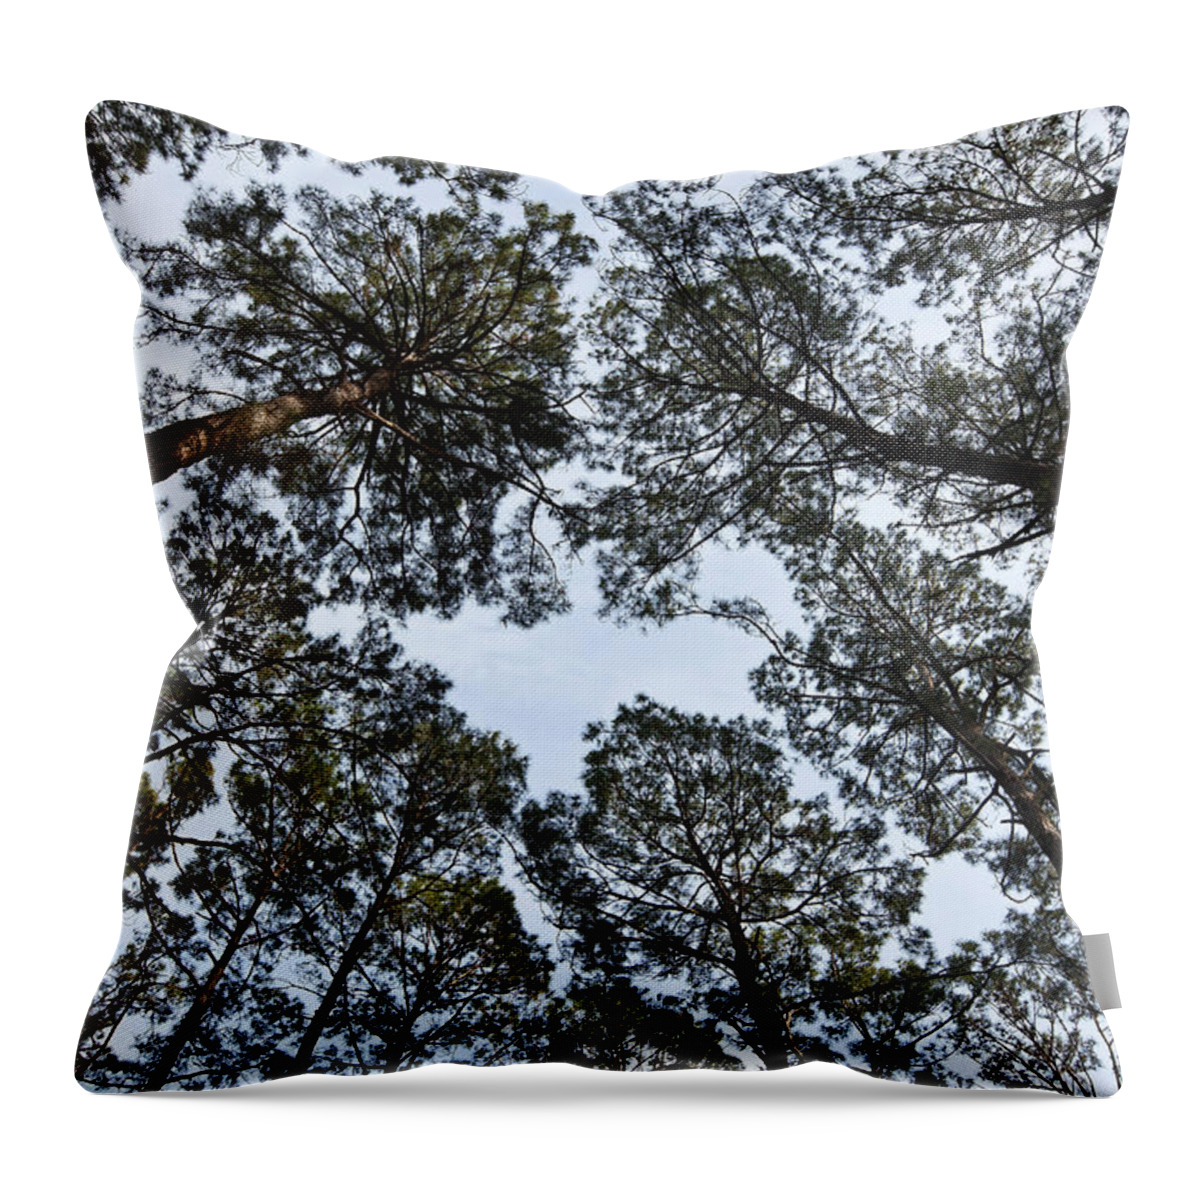 Forest Canopy Throw Pillow featuring the photograph Loblolly Pine Forest Canopy by Greg Dimijian